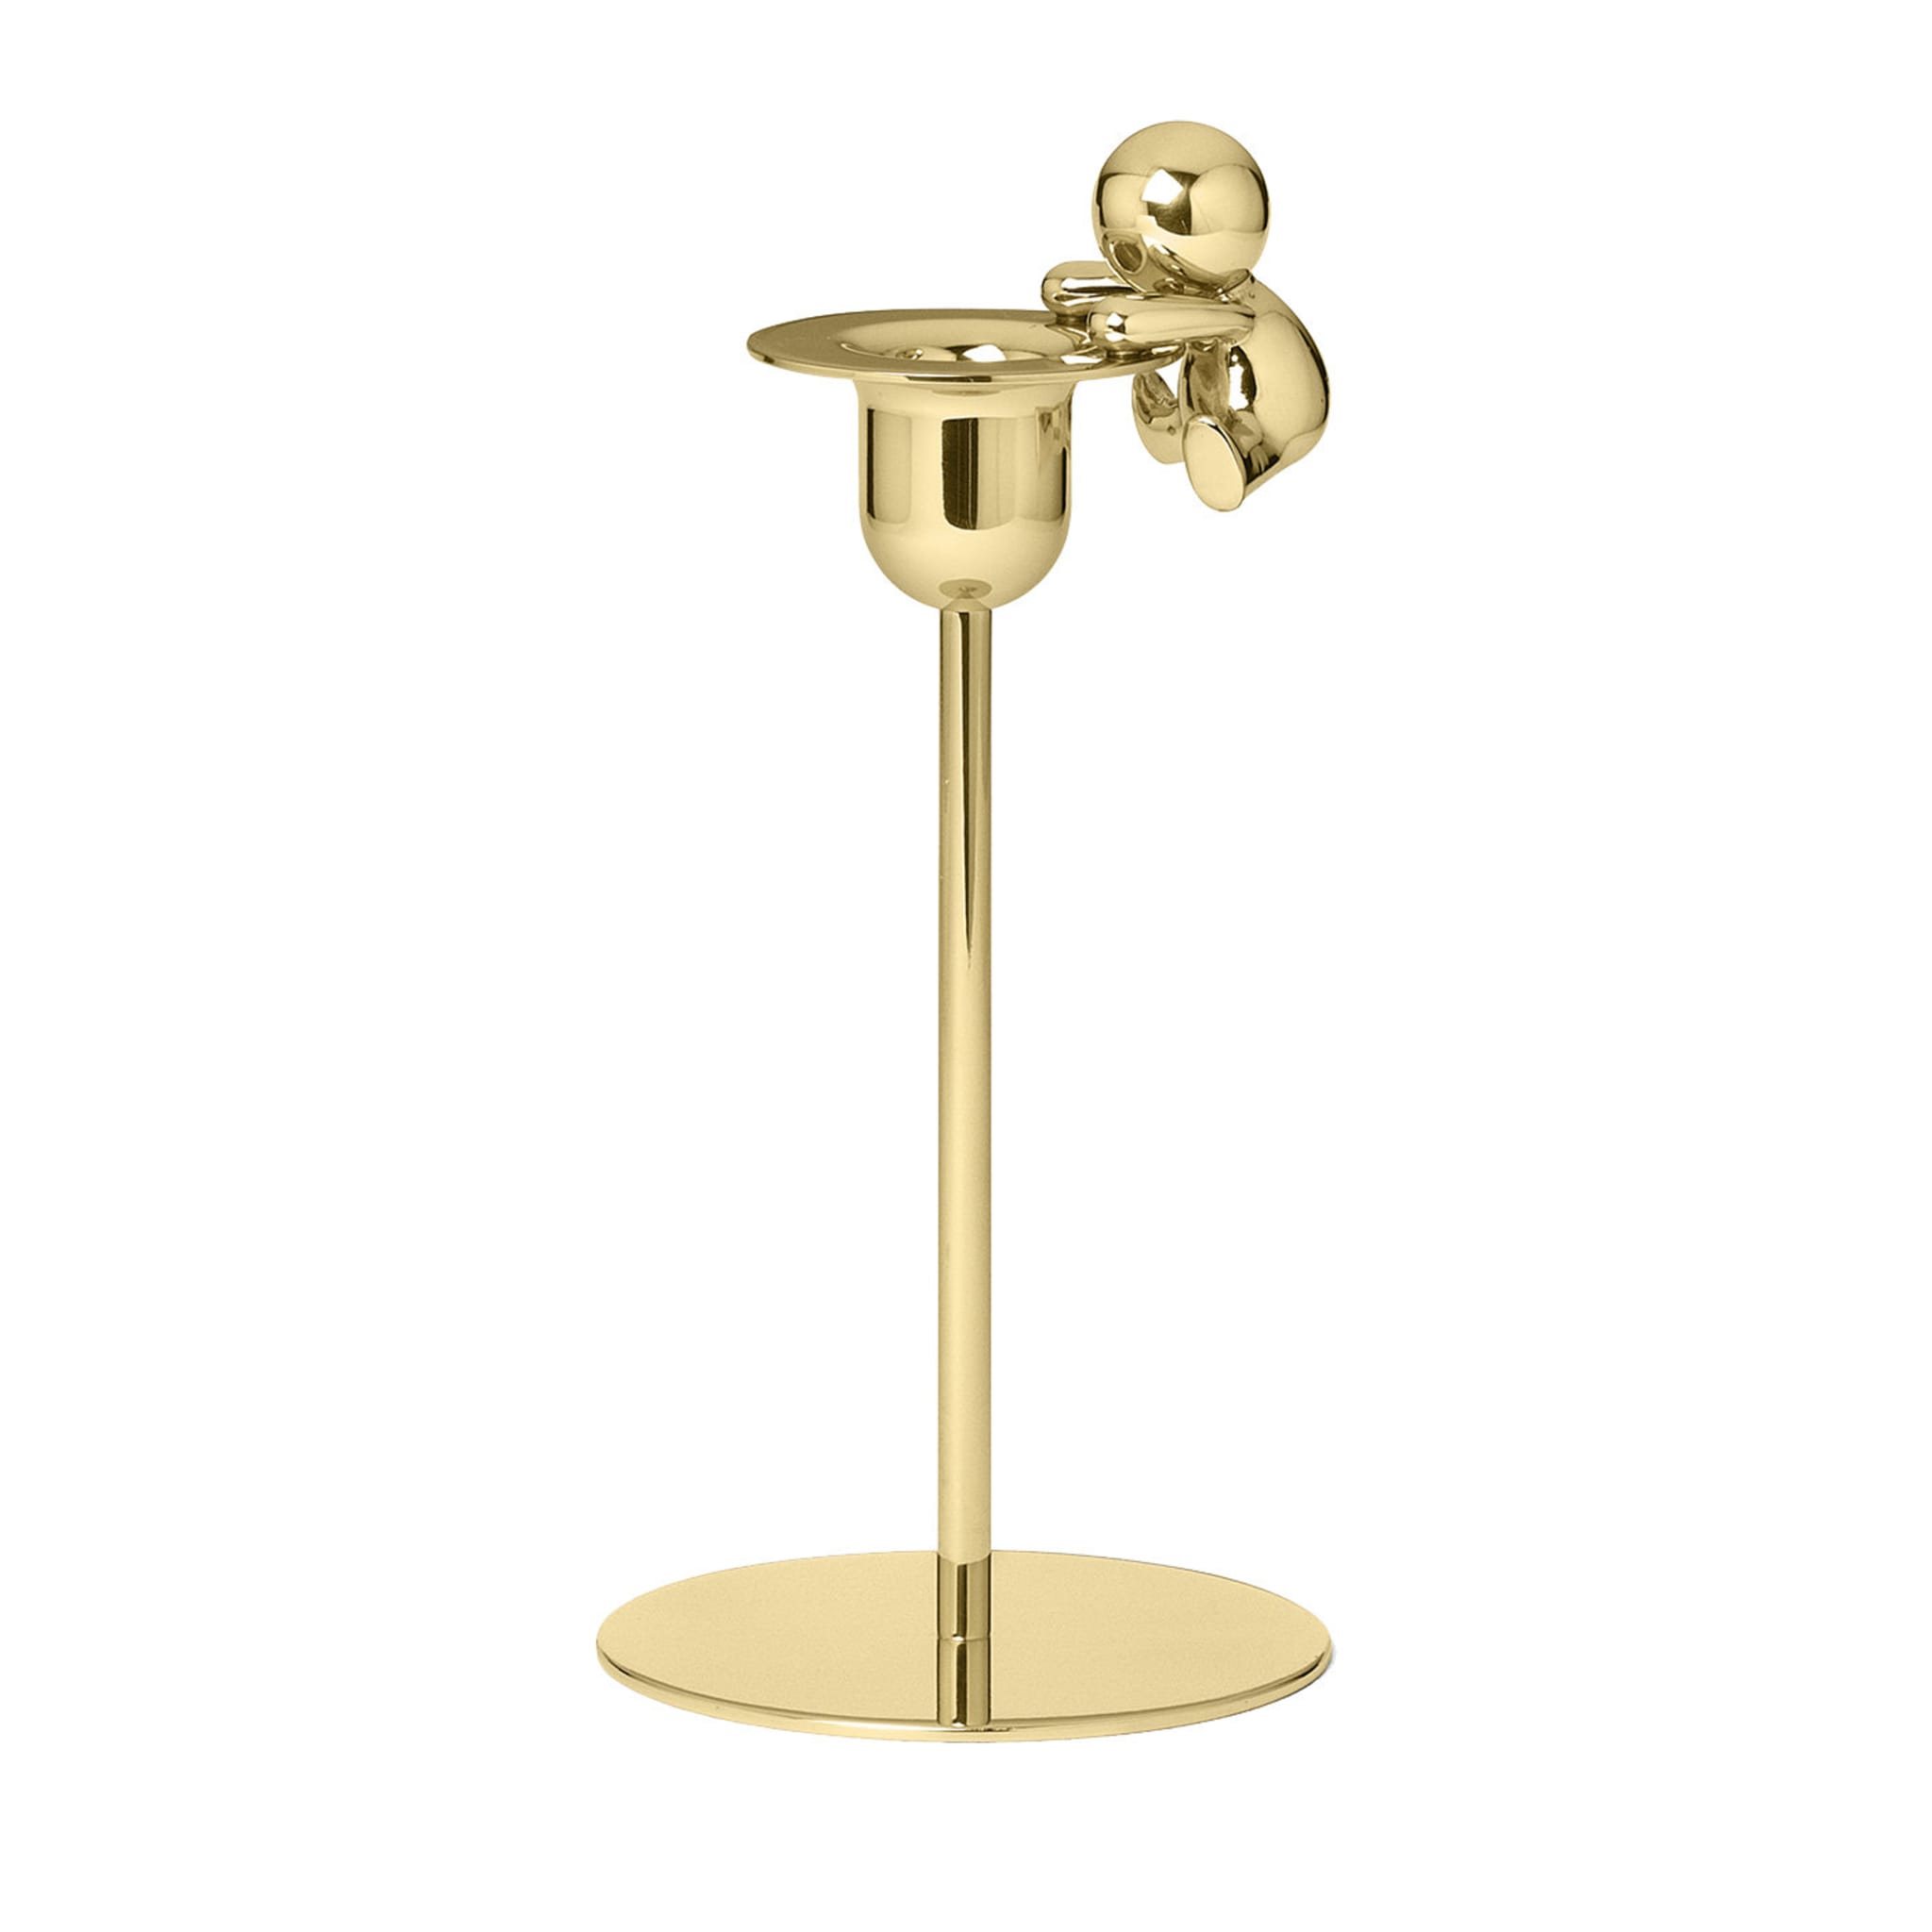 Omini Climber Short Candlestick in Polished Brass By Stefano Giovannoni - Main view